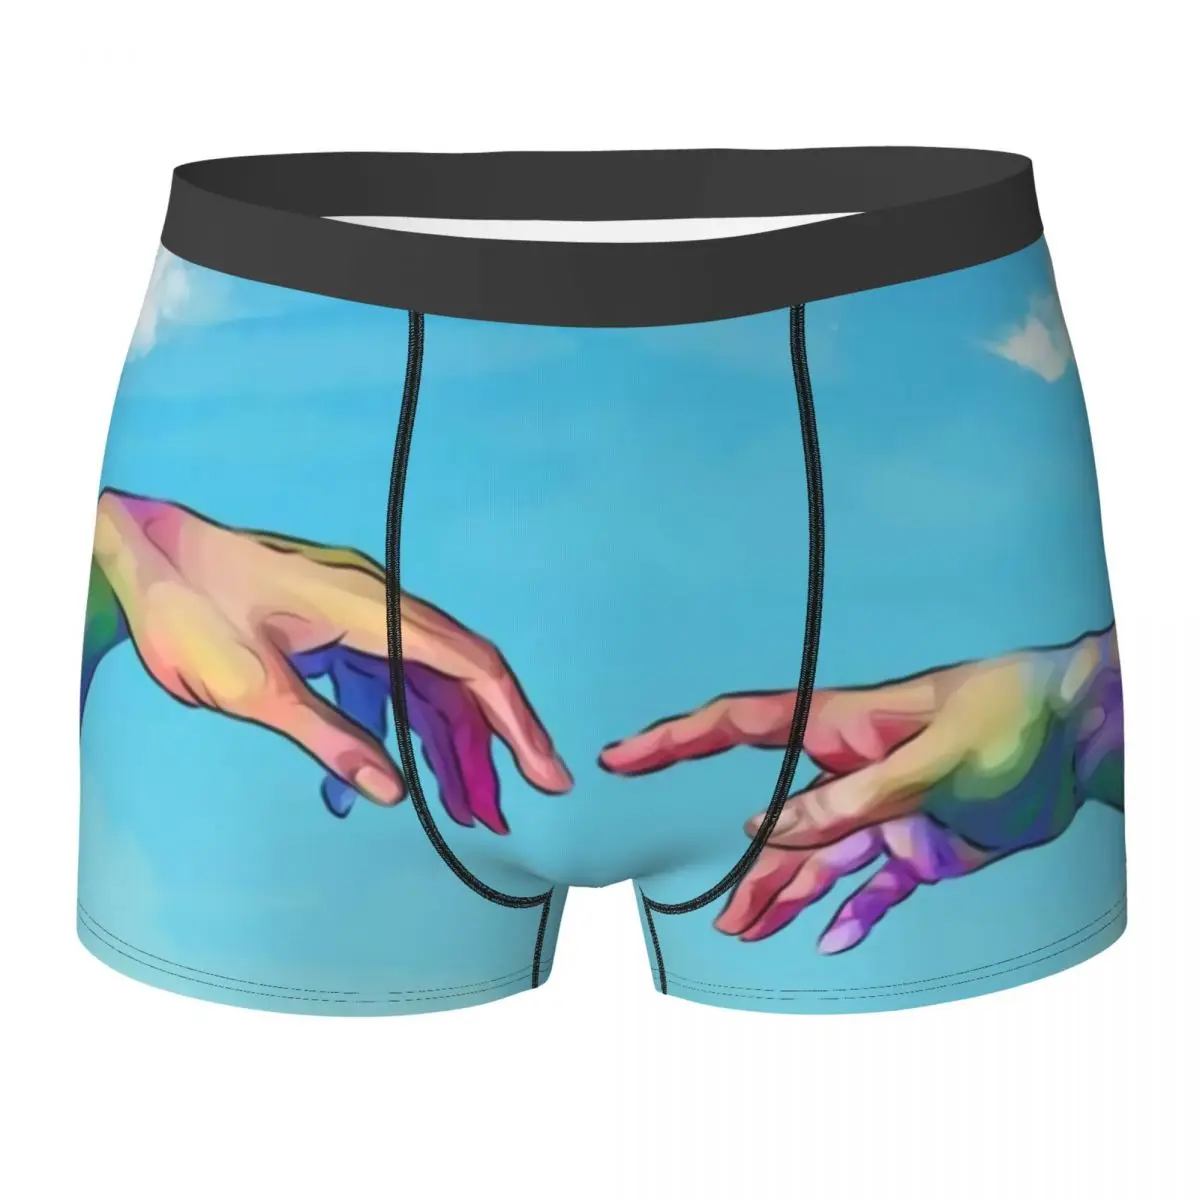 

Michelangelo Hands The Creation Of Adam Underwear Painting Male Panties Print Plain Trunk High Quality Boxer Brief Plus Size 2XL